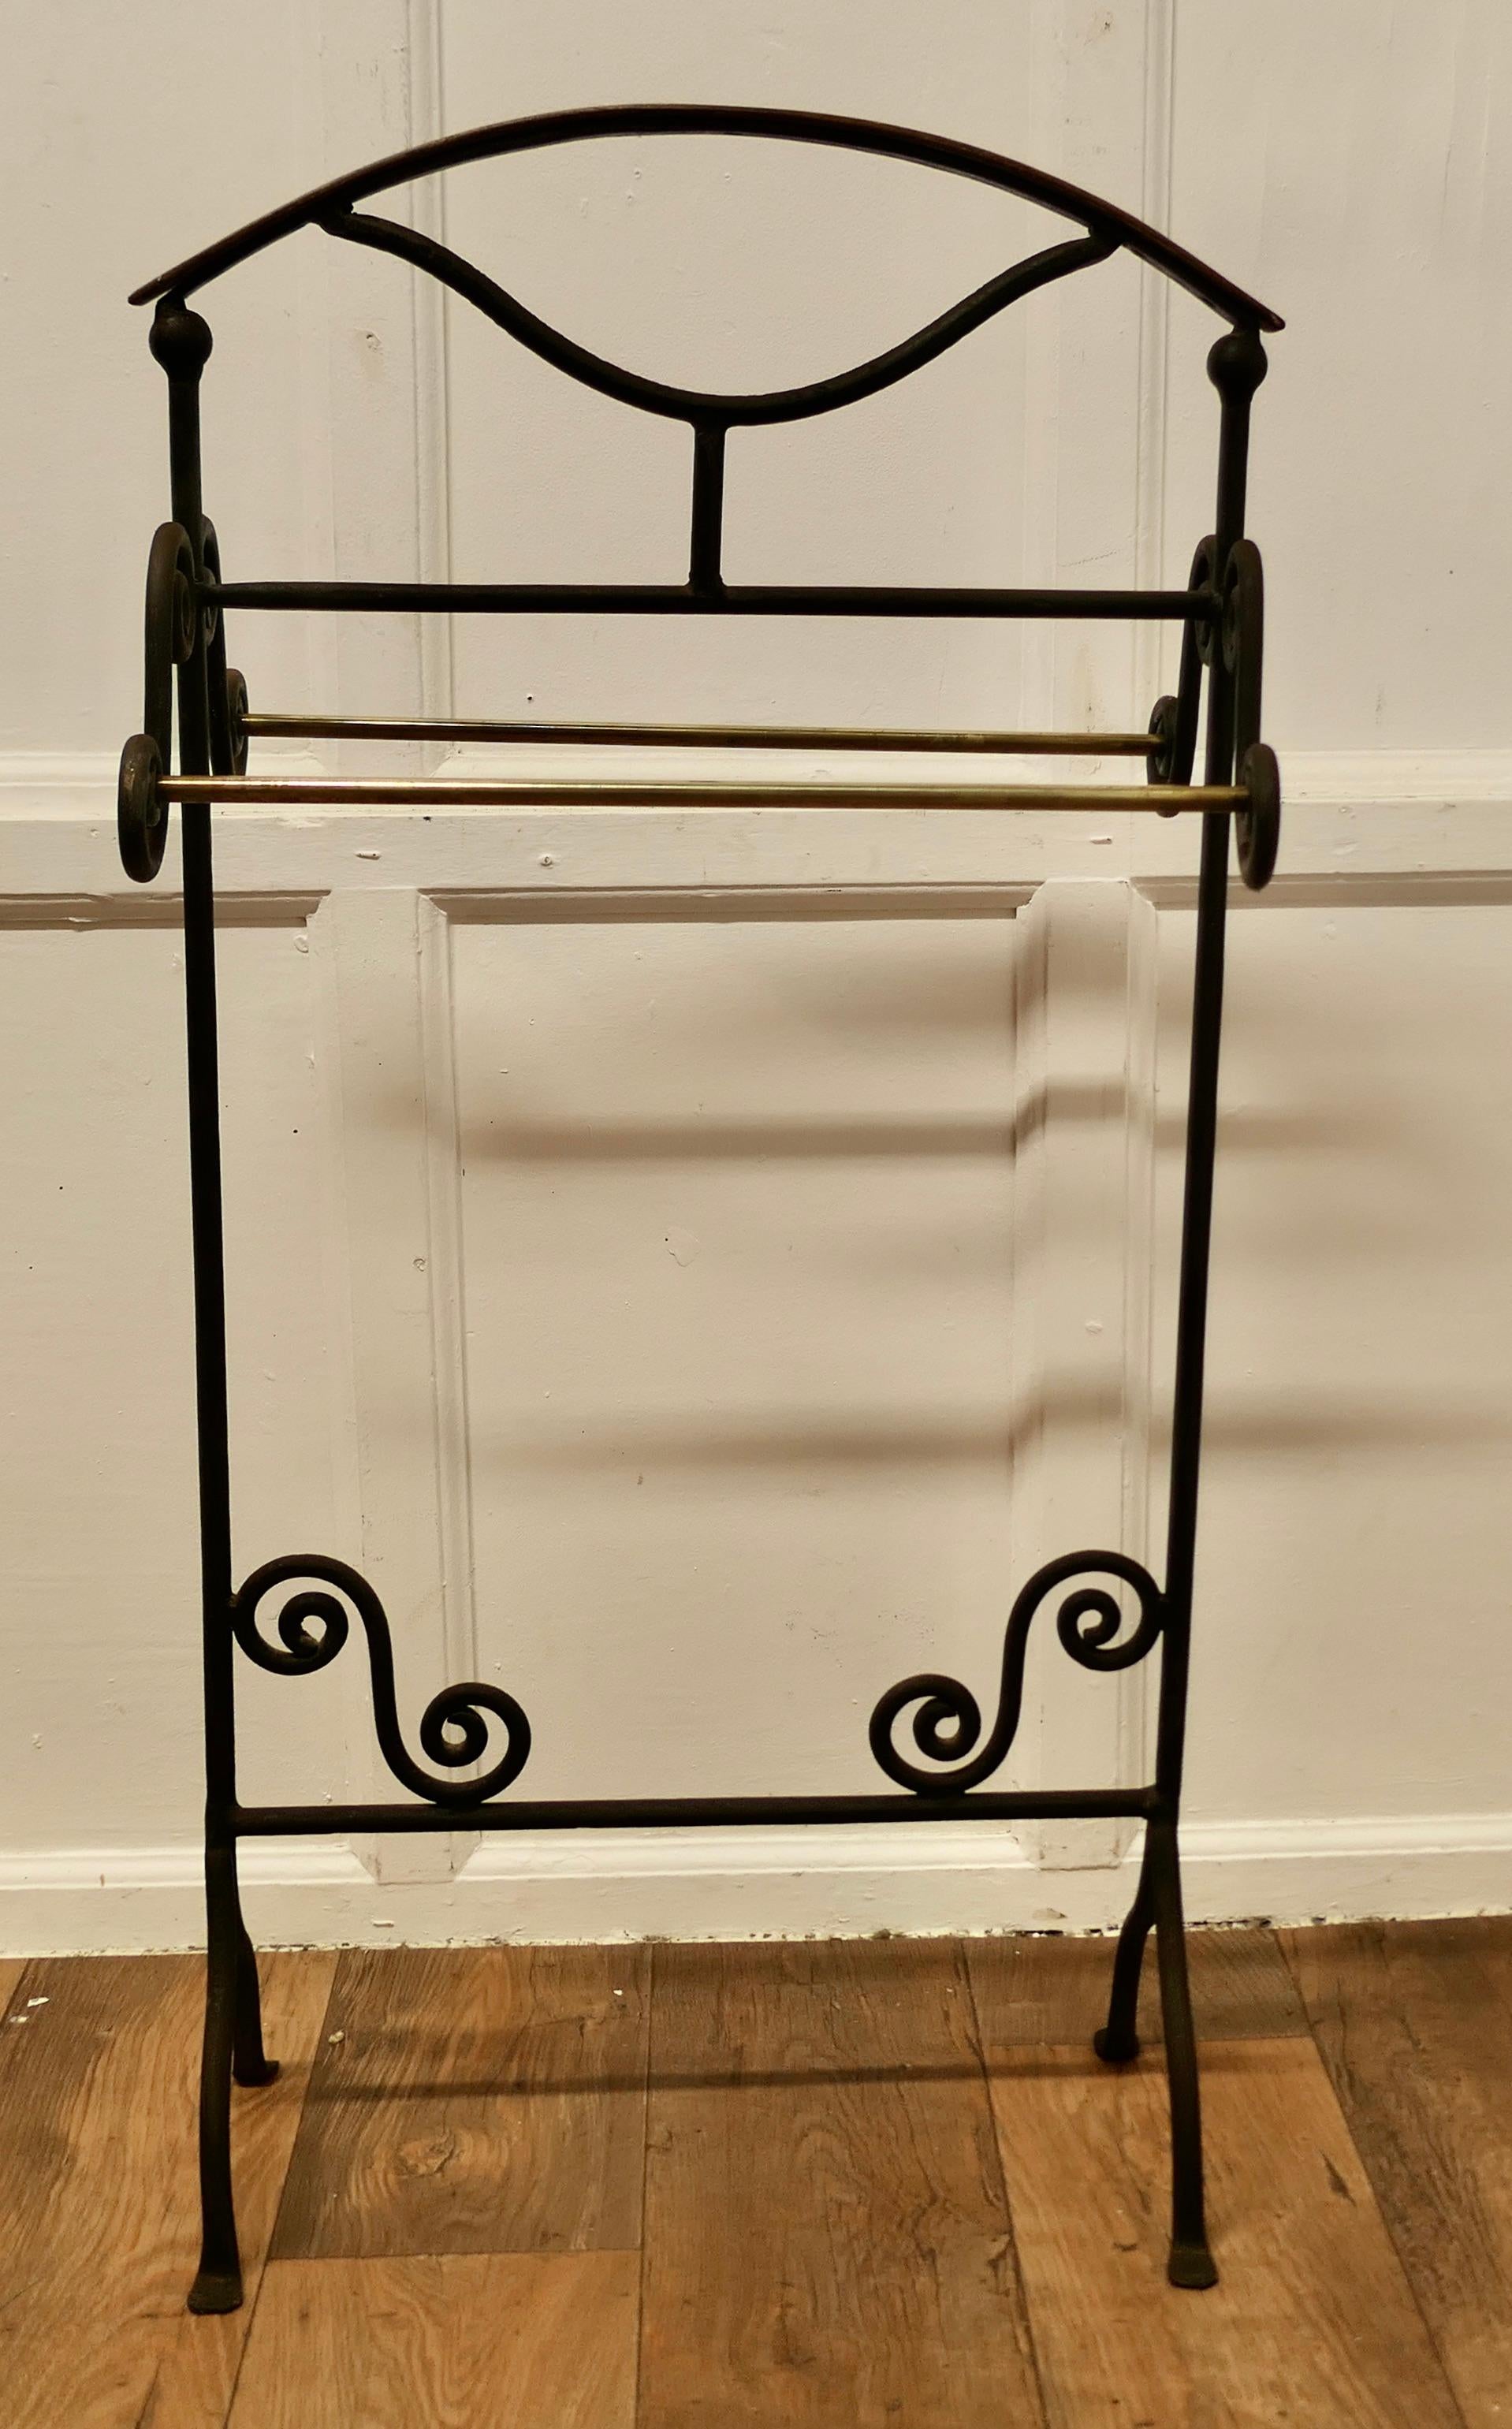 Wrought Iron Towel Rail or Clothes Airer  The Towel Rail or Clothes Airer has pr In Good Condition For Sale In Chillerton, Isle of Wight